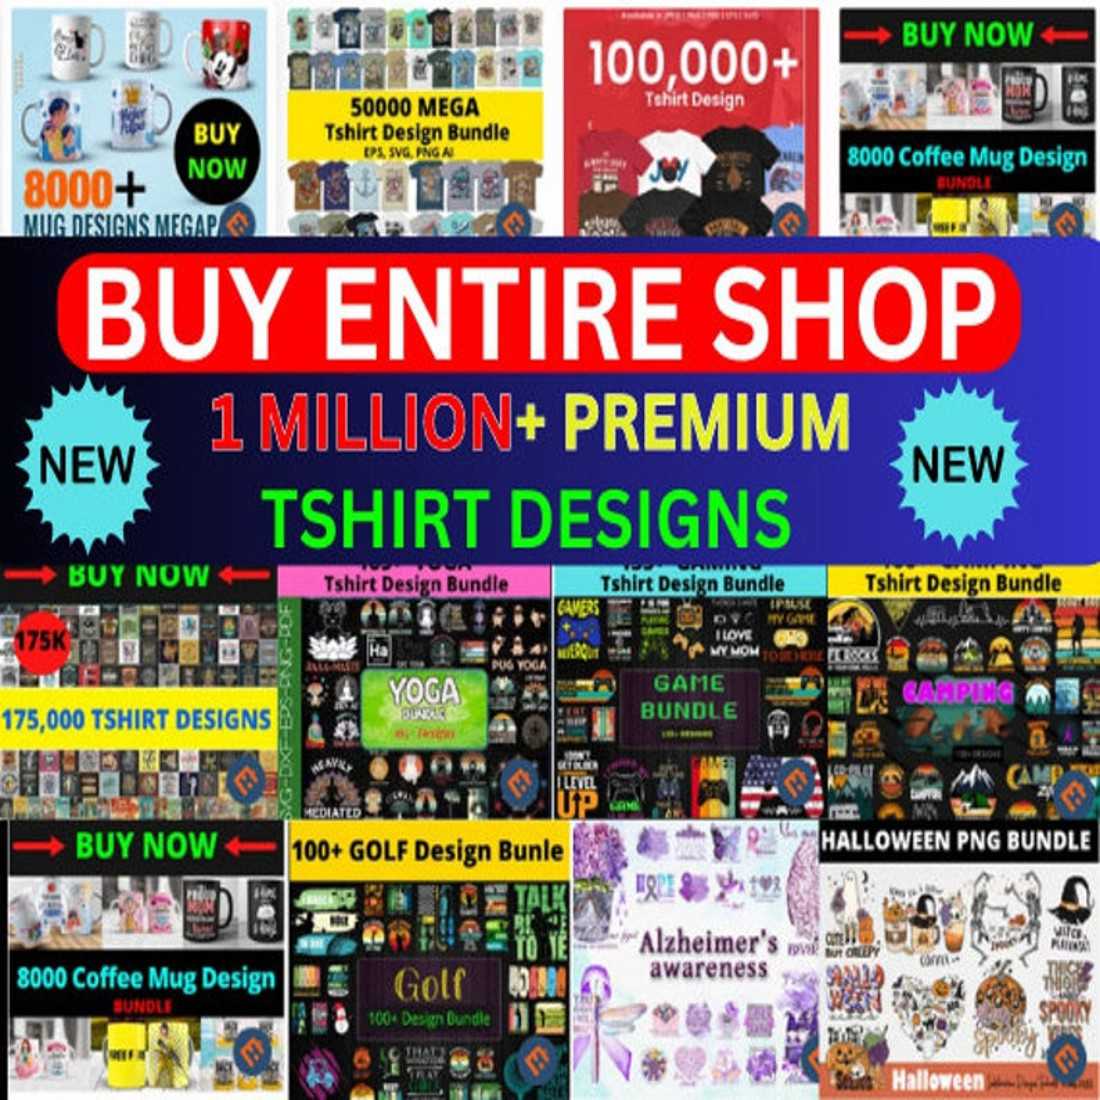 One Million T-shirt Designs Bundle Reselling Rights cover image.